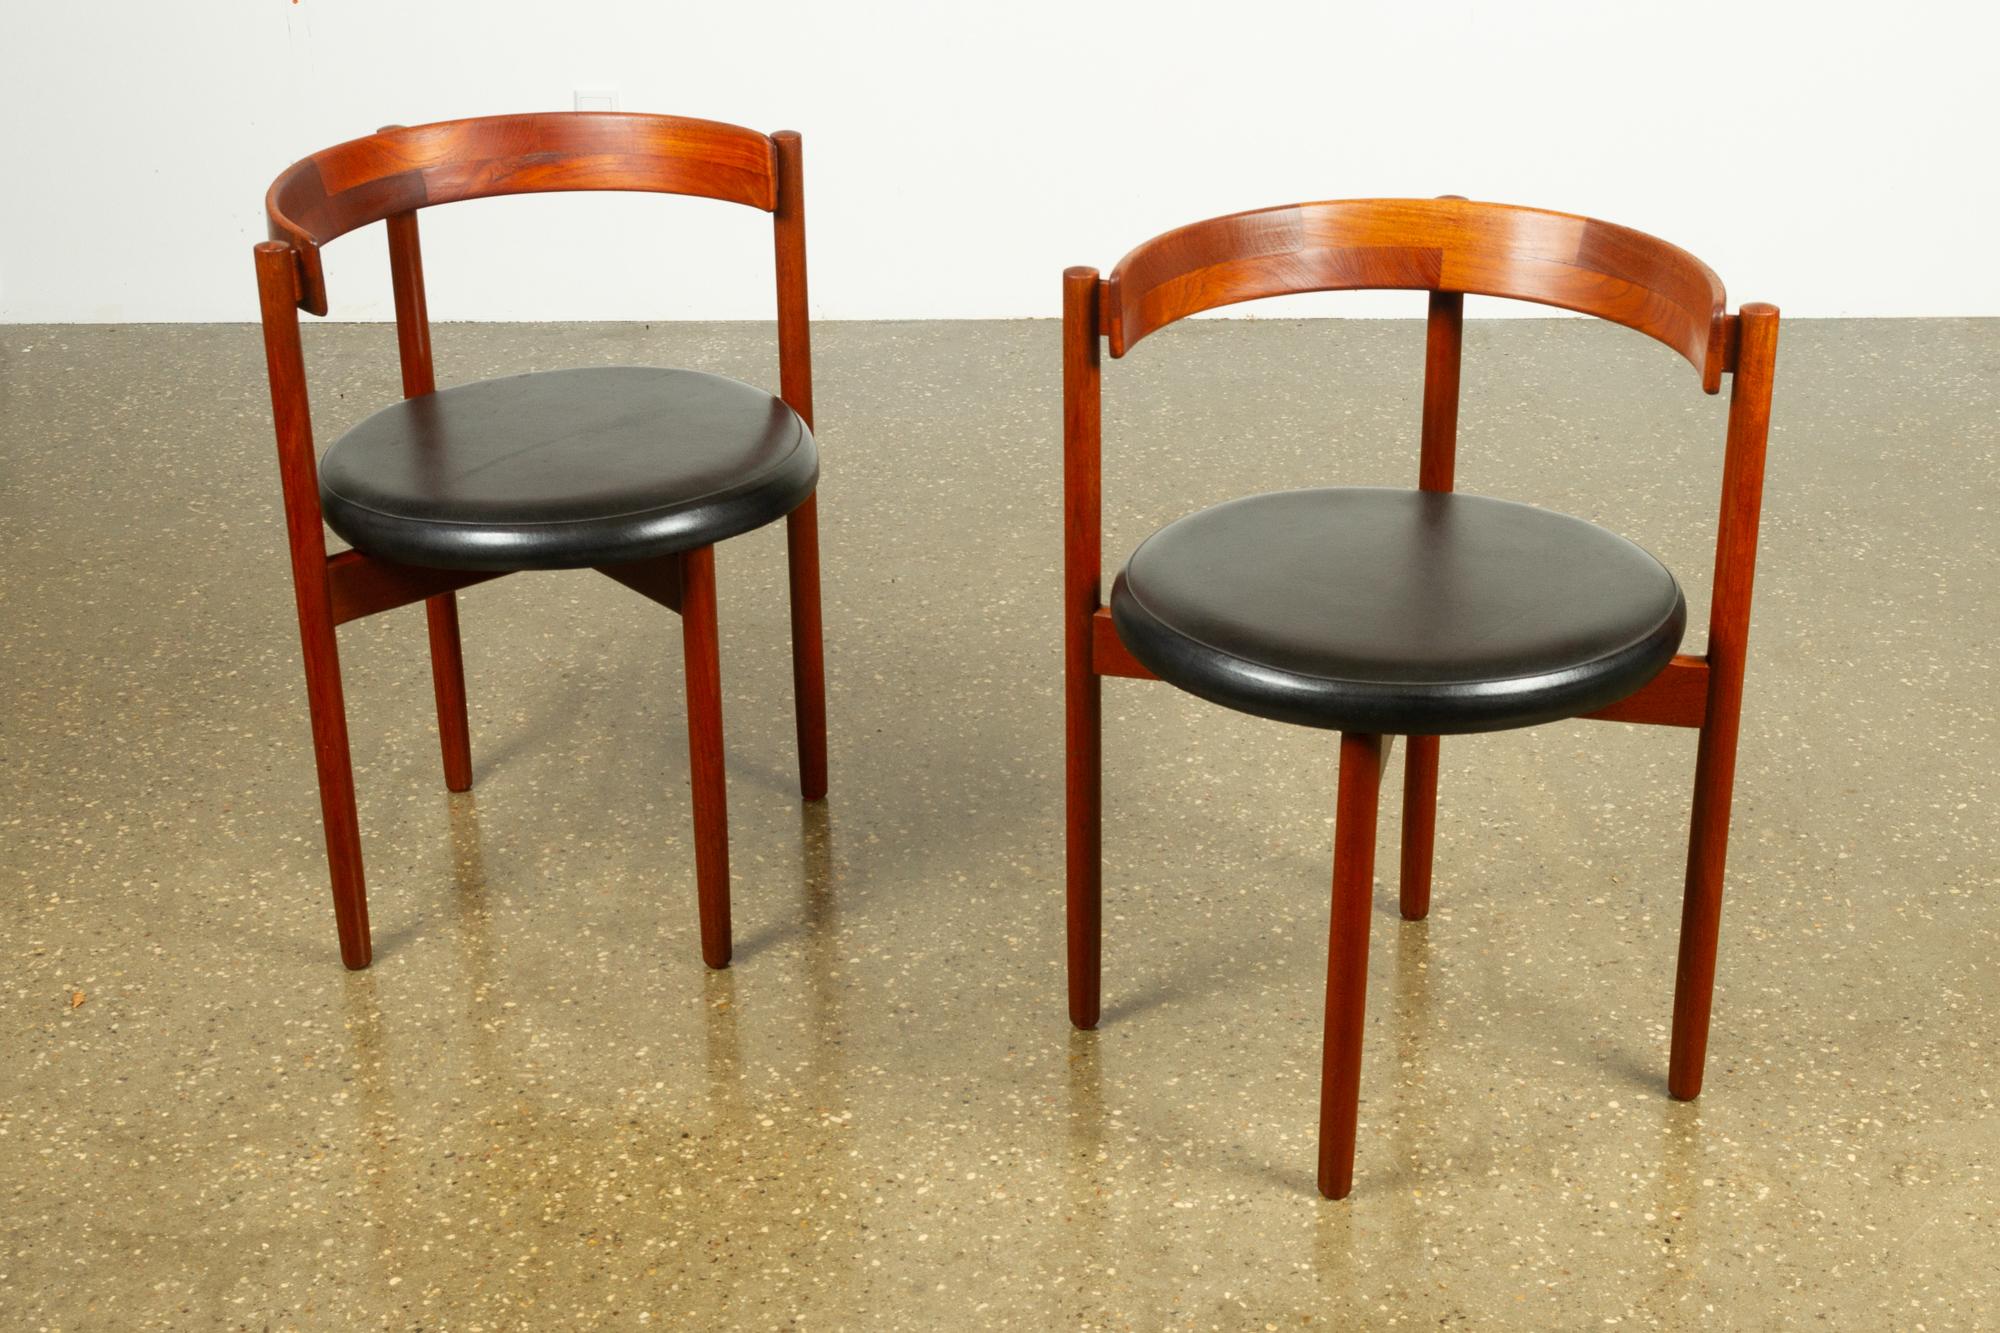 Pair of Danish vintage chairs by Hugo Frandsen, 1960s
Rare set of two Mid-Century Modern armchairs by Danish architect Hugo Frandsen. Circular design with round seats in original leatherette upholstery. Round straight legs and wide curved back and